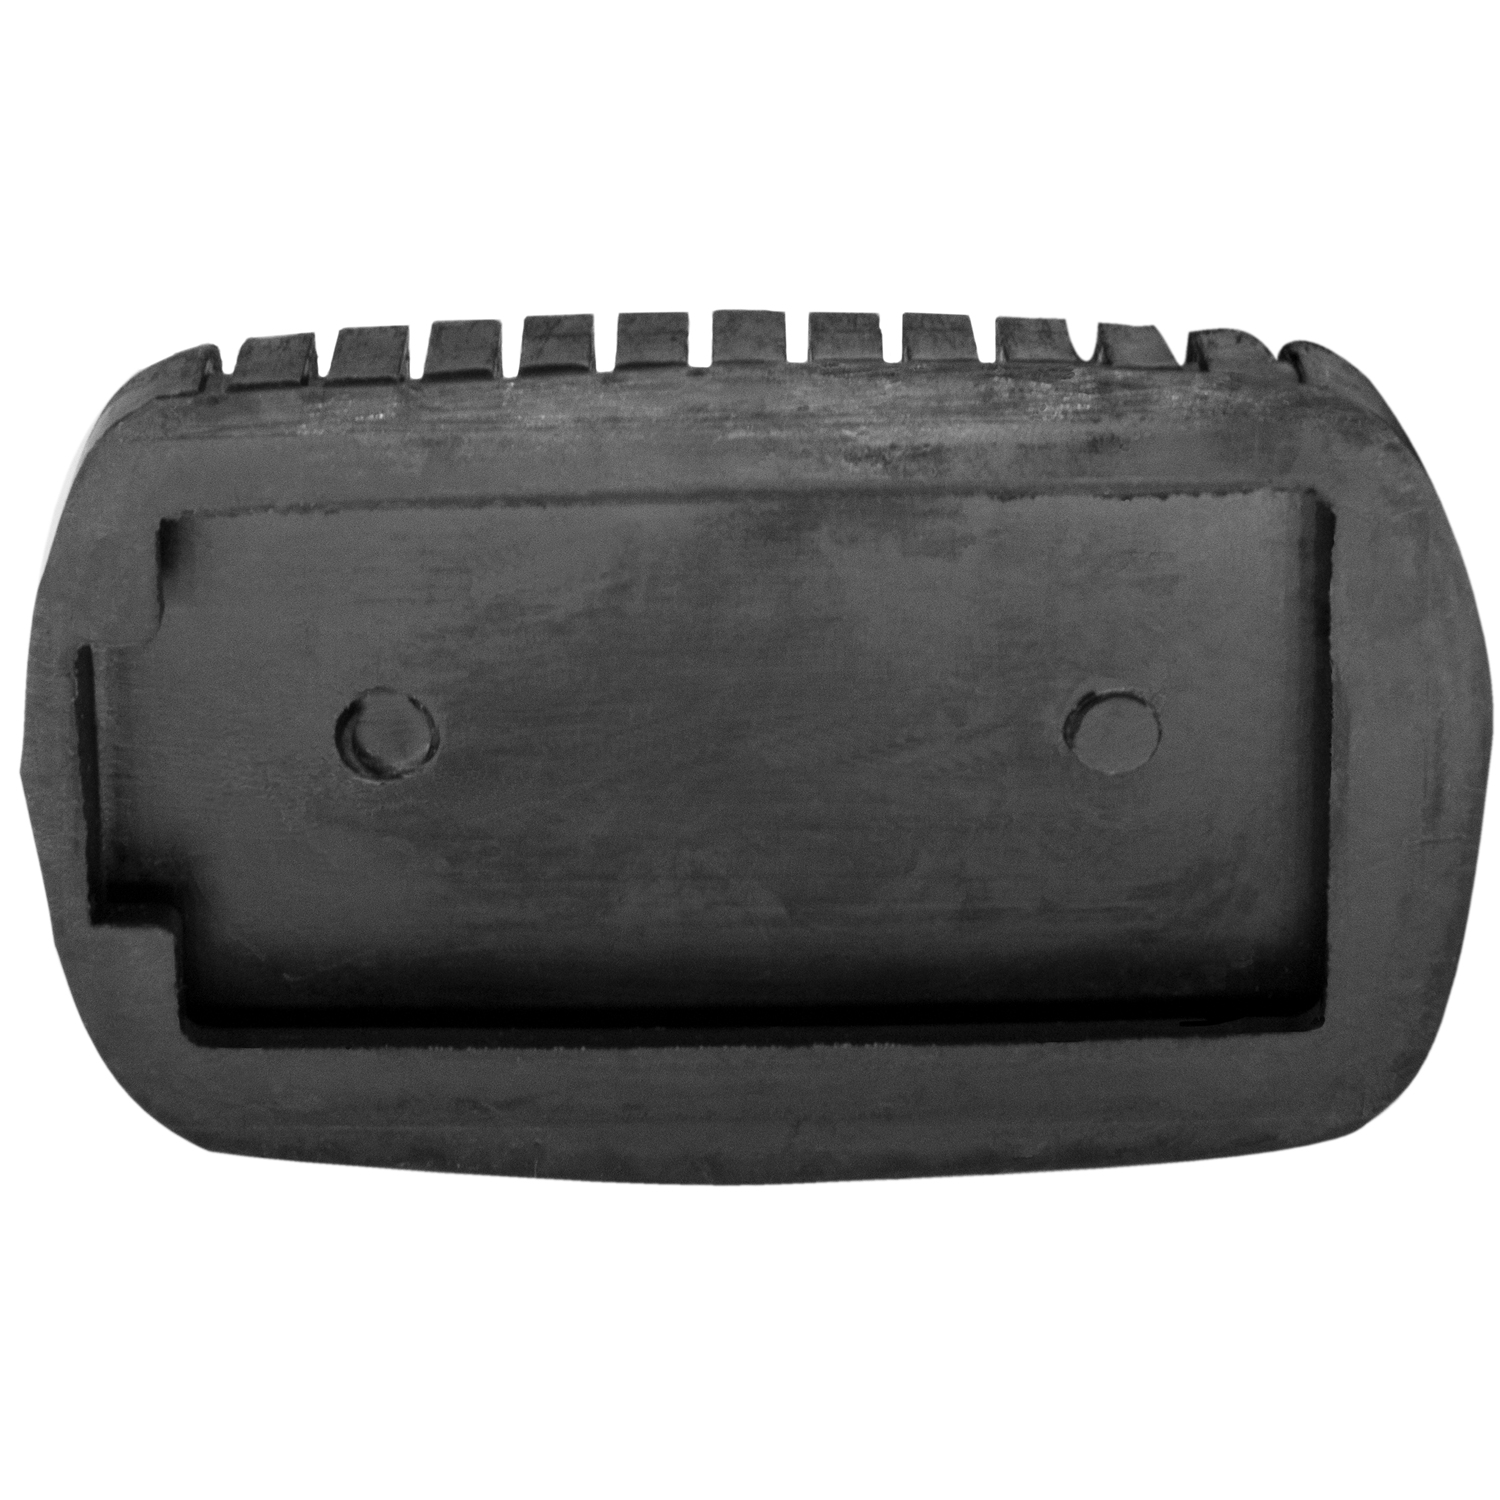 1950 Chevrolet Truck Clutch and Brake Pedal Pad.  2-1/2 wide X 3-7/8 long-CB 100-A/EA